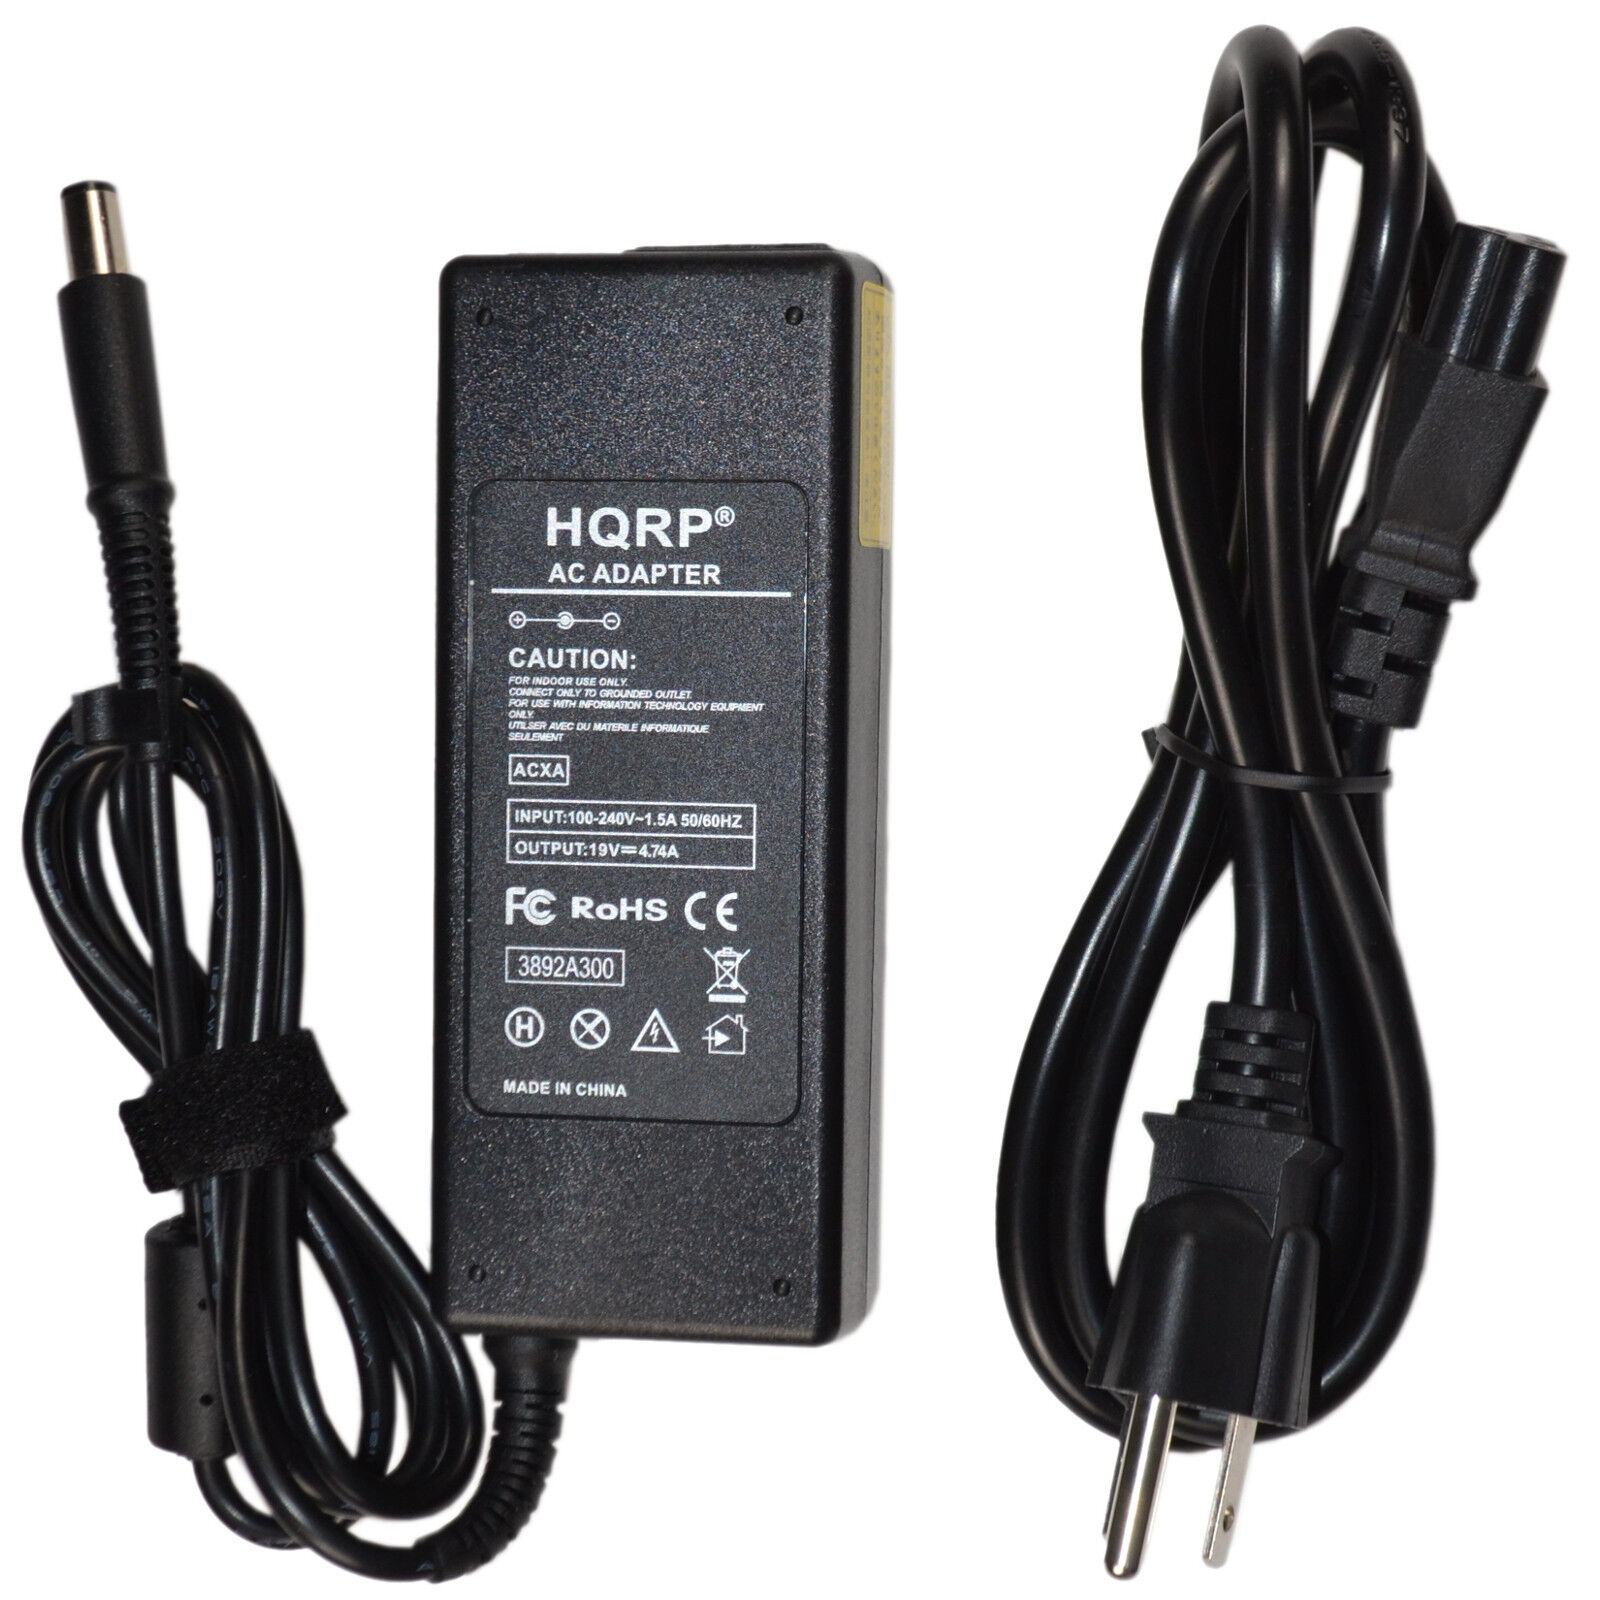 90W AC Power Adapter / Charger for HP Pavilion DV5-DV7, G6-G72 Series Laptop